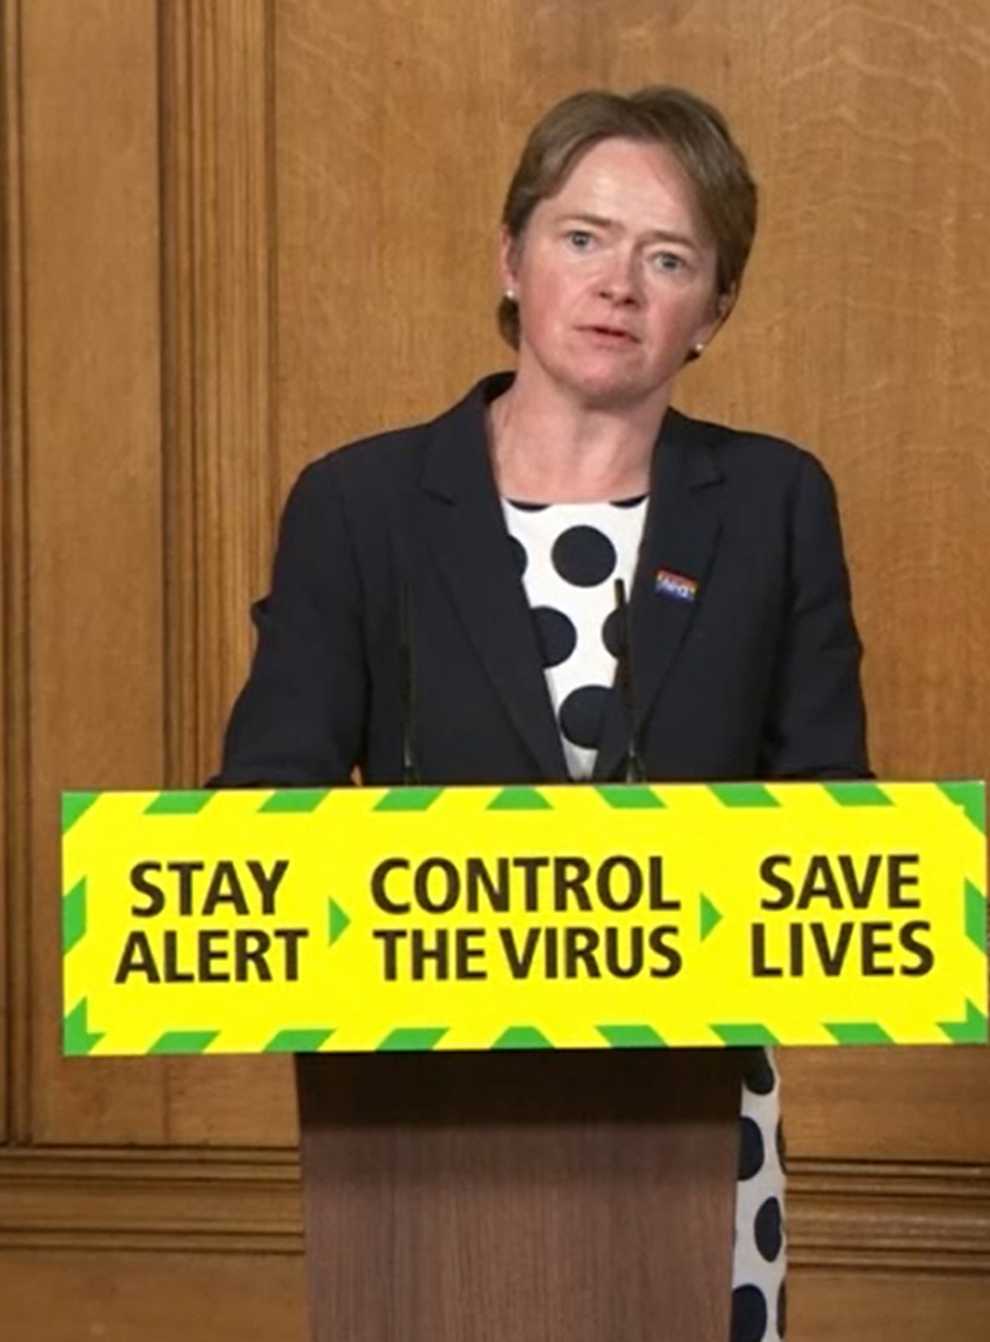 Screen grab of Baroness Dido Harding, executive chairwoman of NHS Test and Trace, during a media briefing in Downing Street, London, on coronavirus